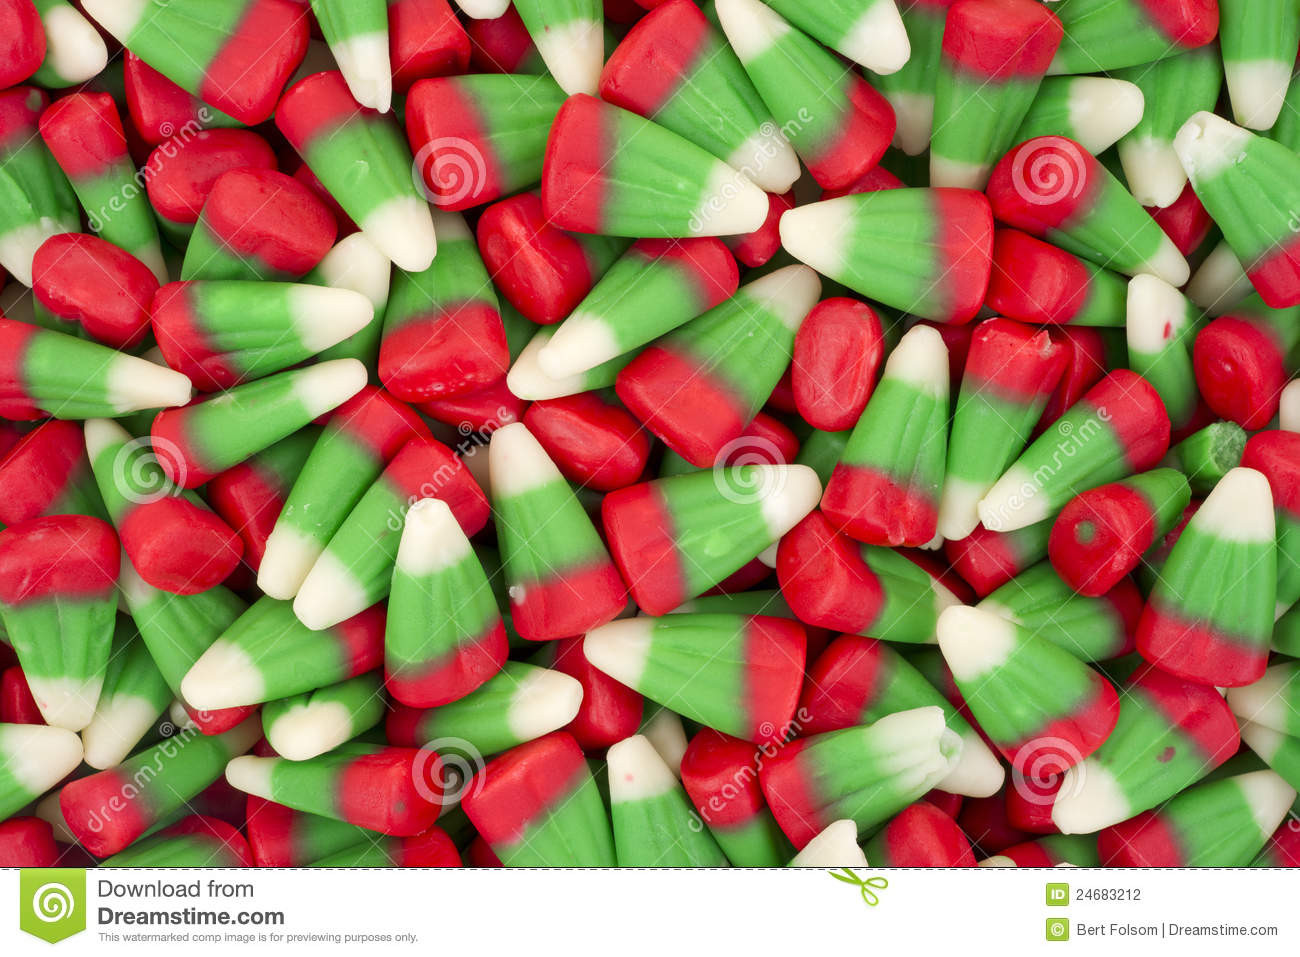 Candy Corn Colors
 Candy Corn In Holiday Colors Stock Image of close